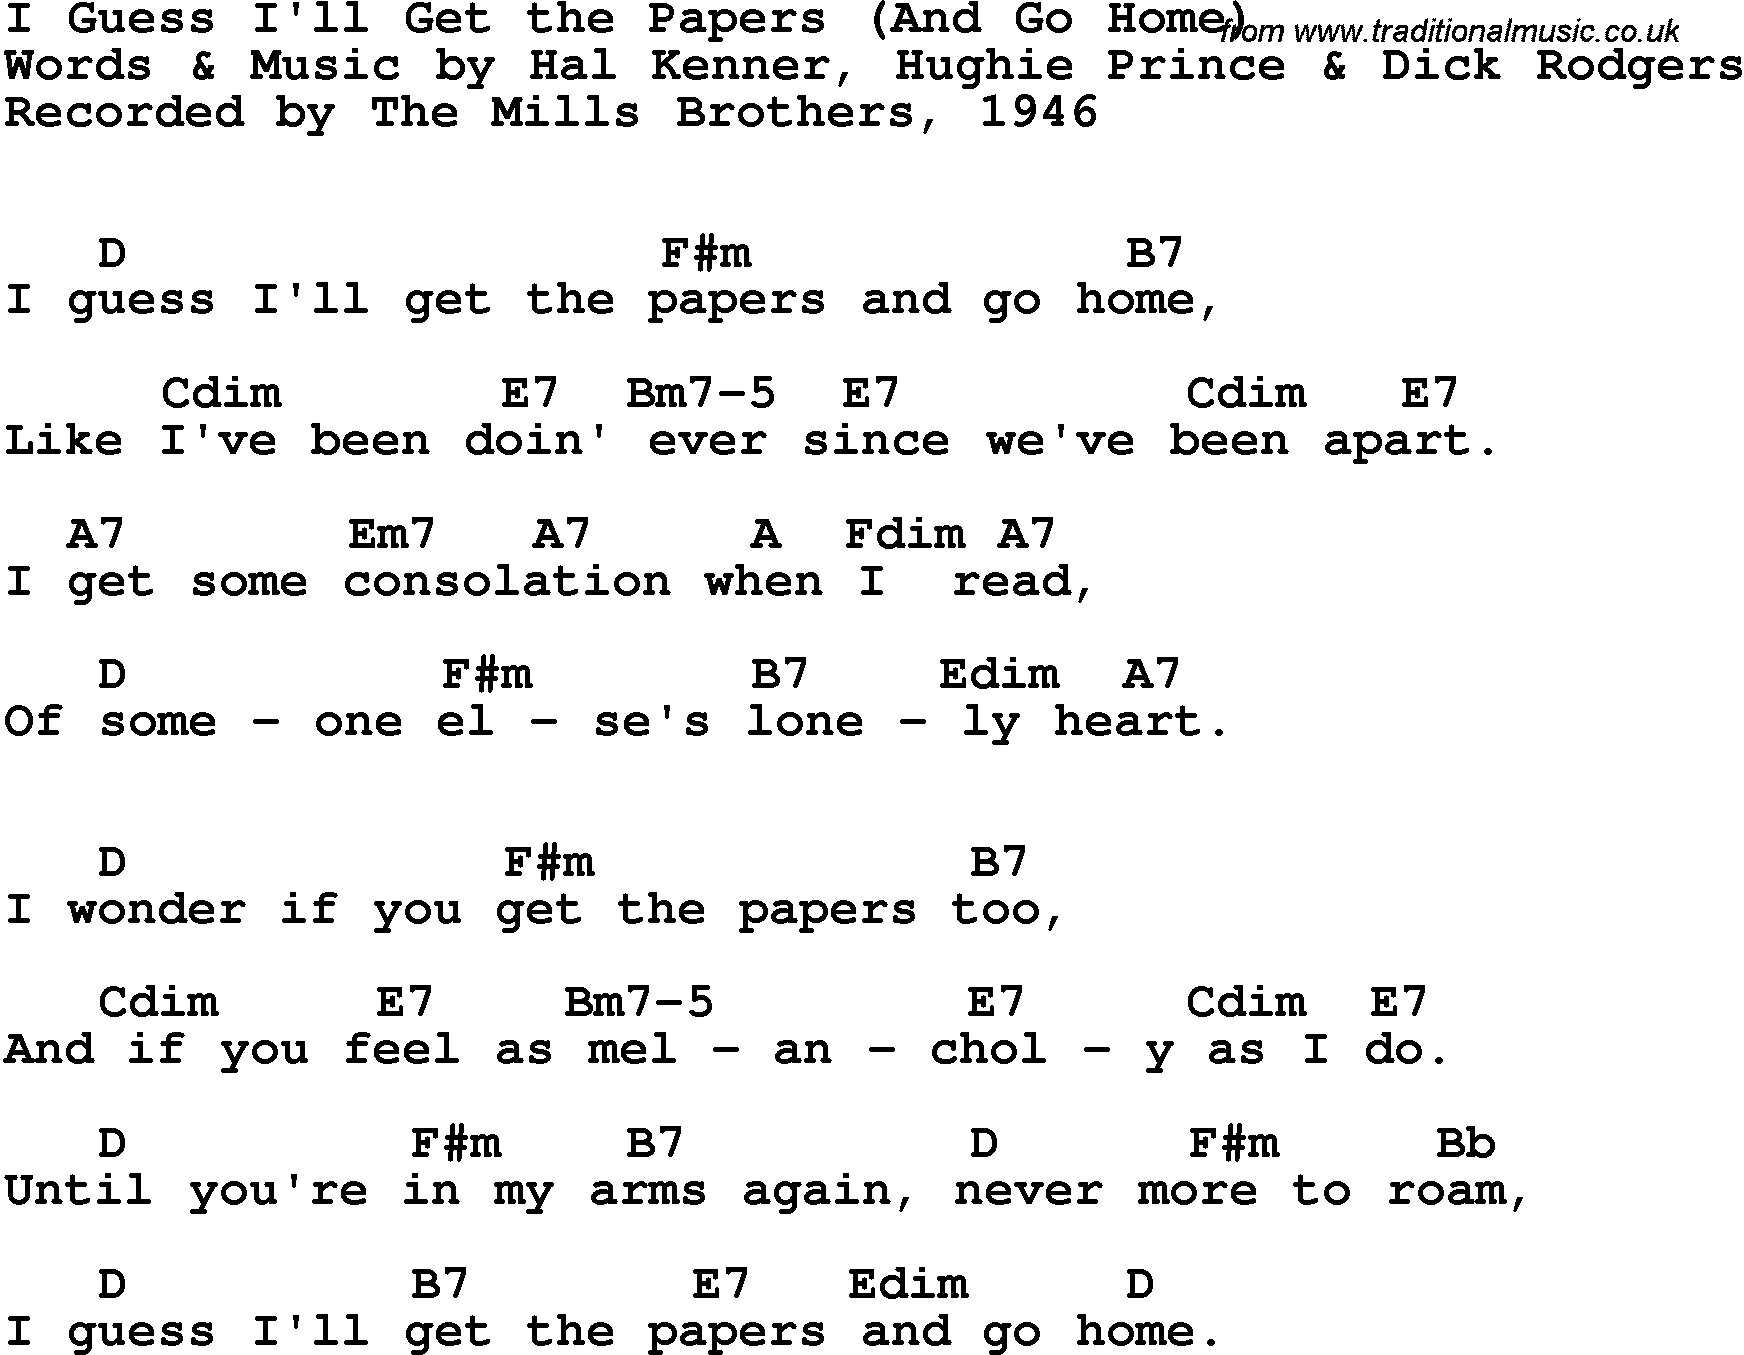 Song Lyrics with guitar chords for I Guess I'll Get The Papers (And Go Home)- The Mills Brothers, 1946